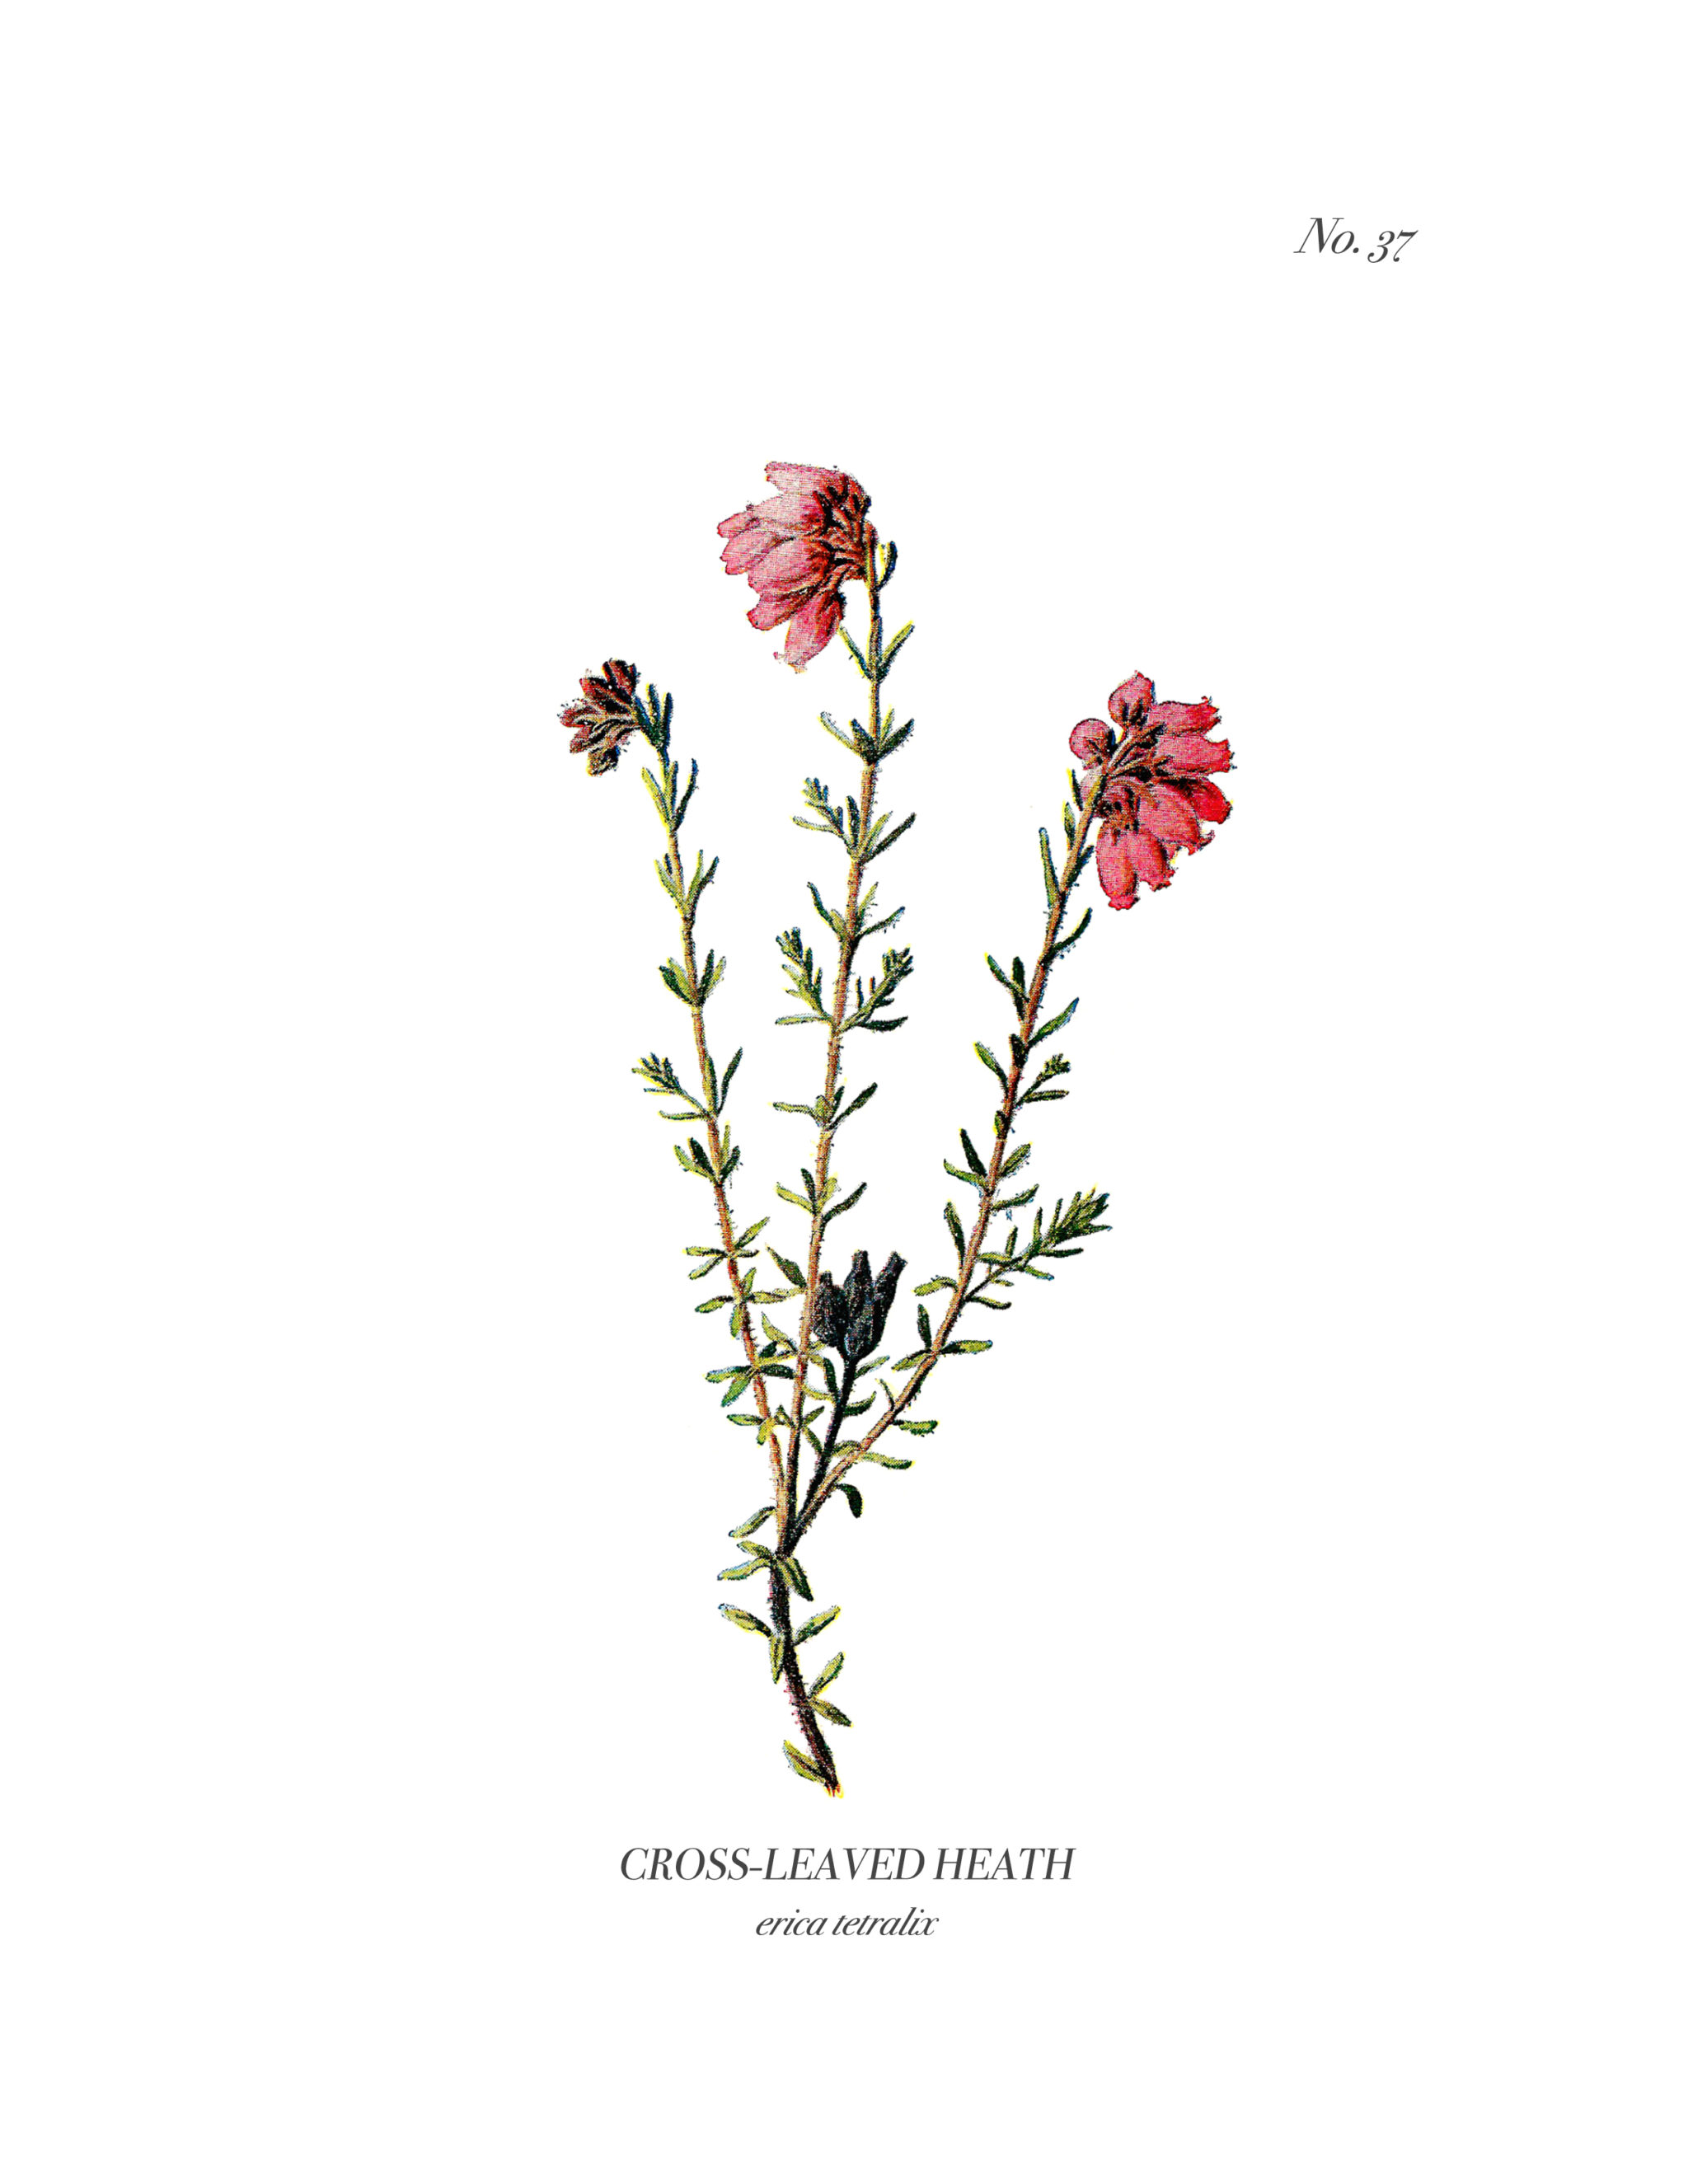 A set of four vintage wild flower botanical prints are an easy way to add charm and character to any home. Download them for free at www.aburstofbeautiful.com